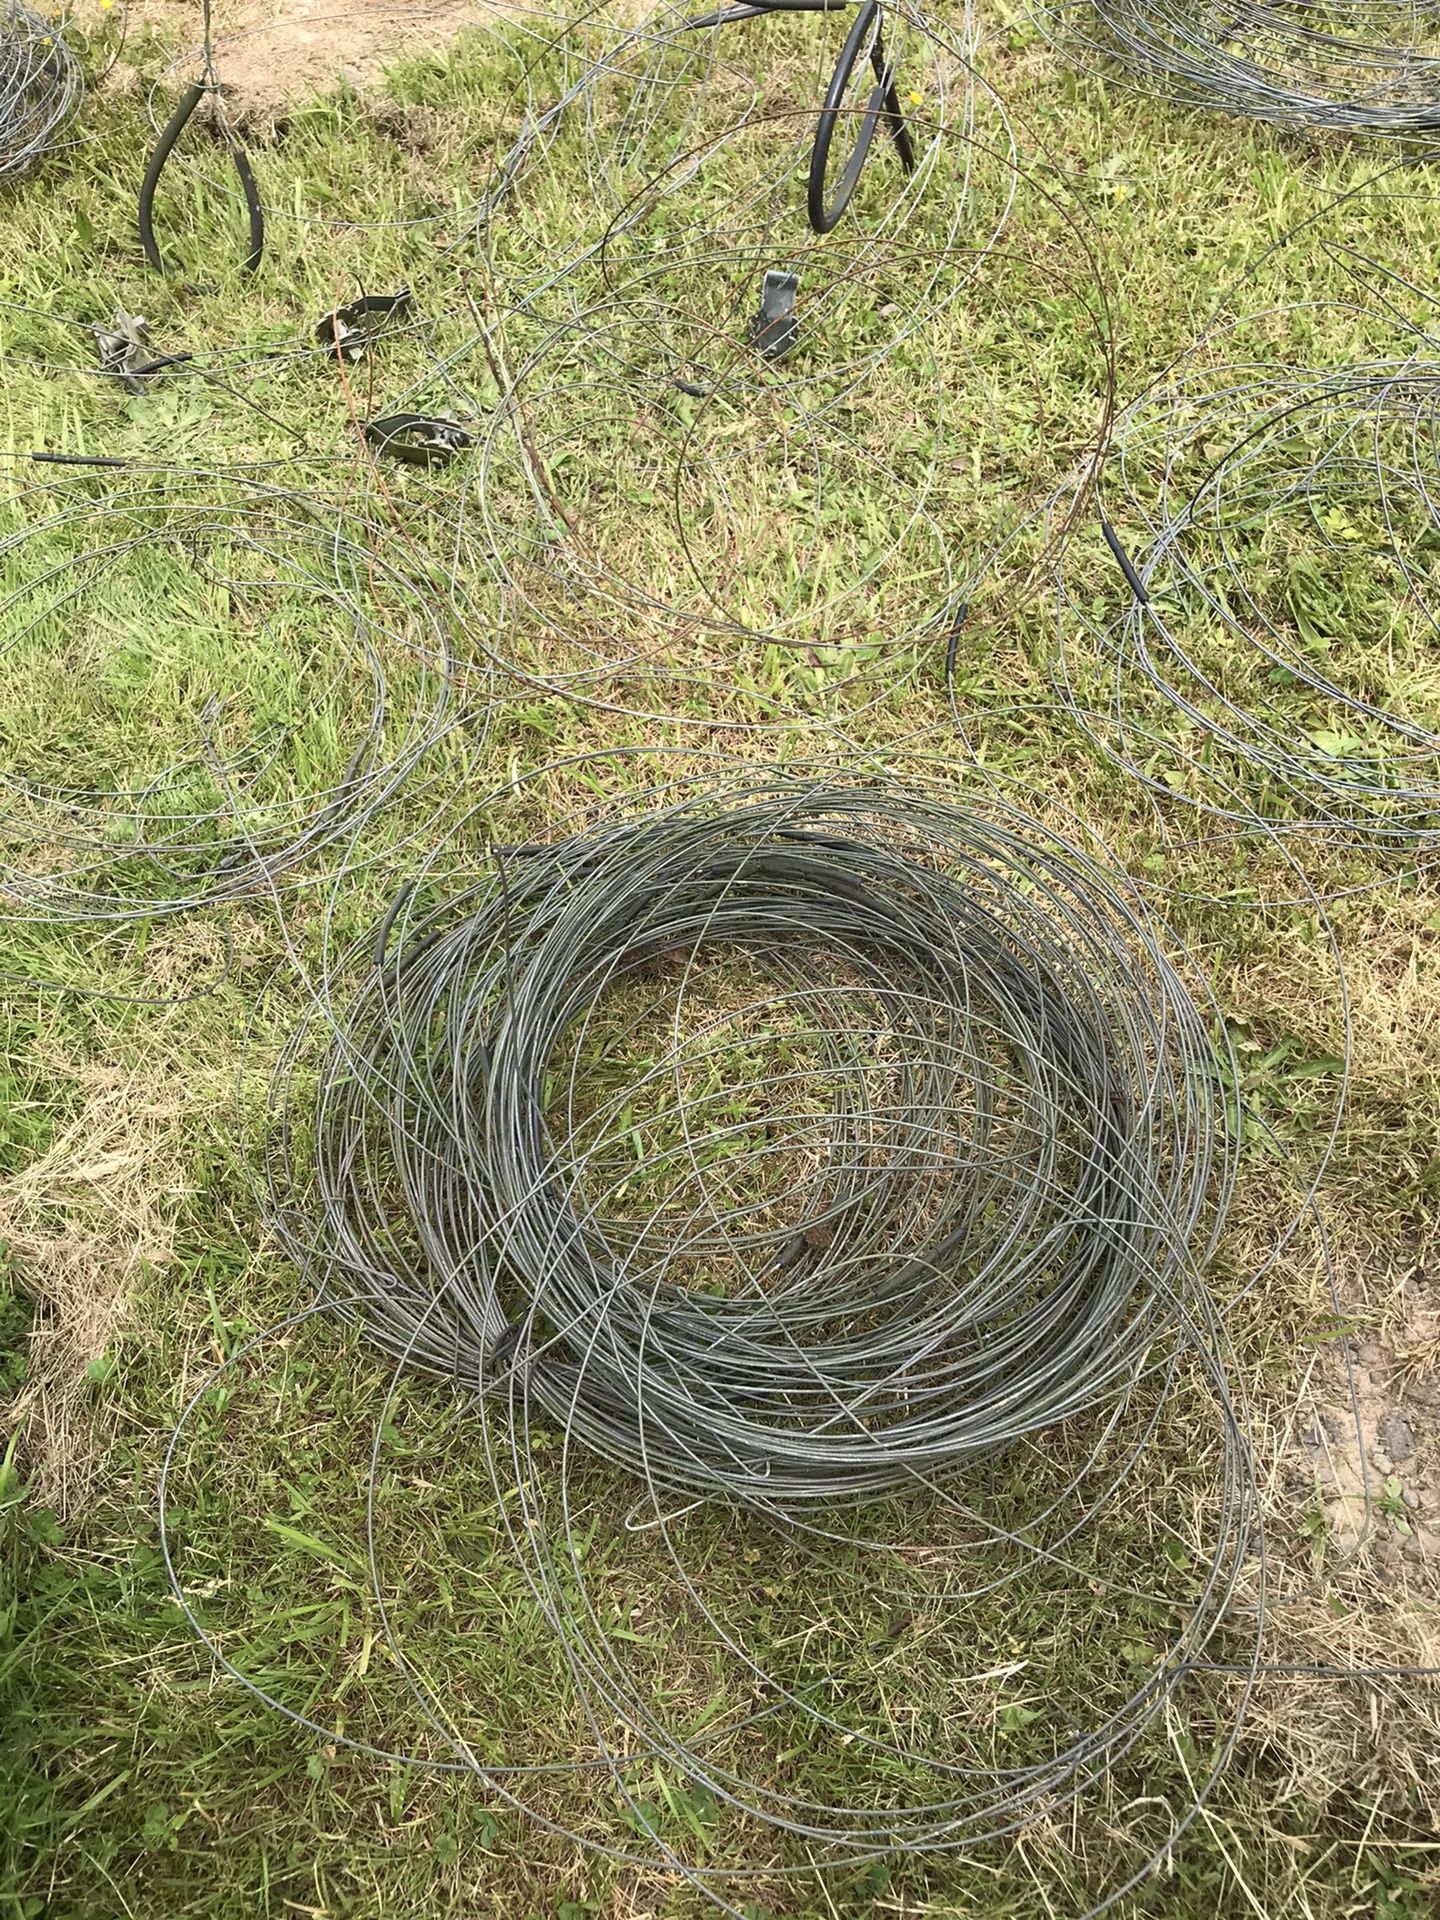 Fence wire